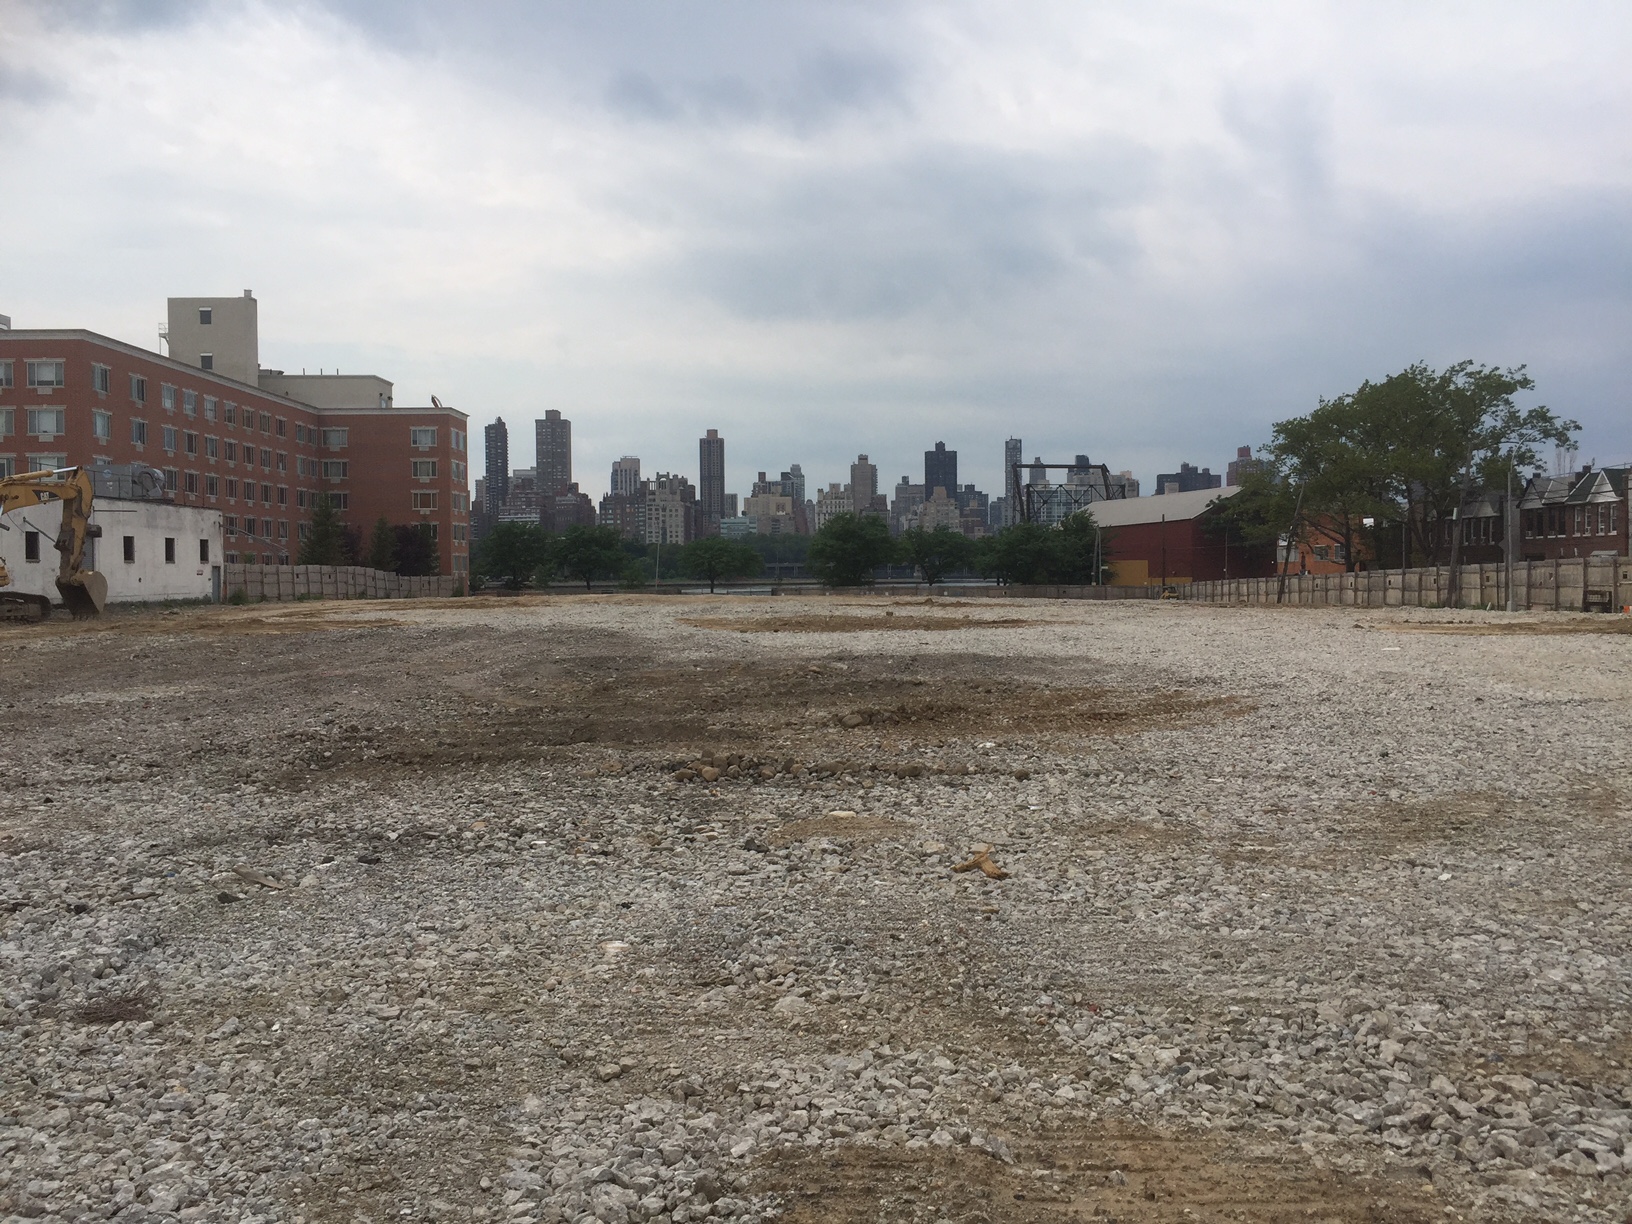 A Large Residential Development Planned for 30-80 12th Street